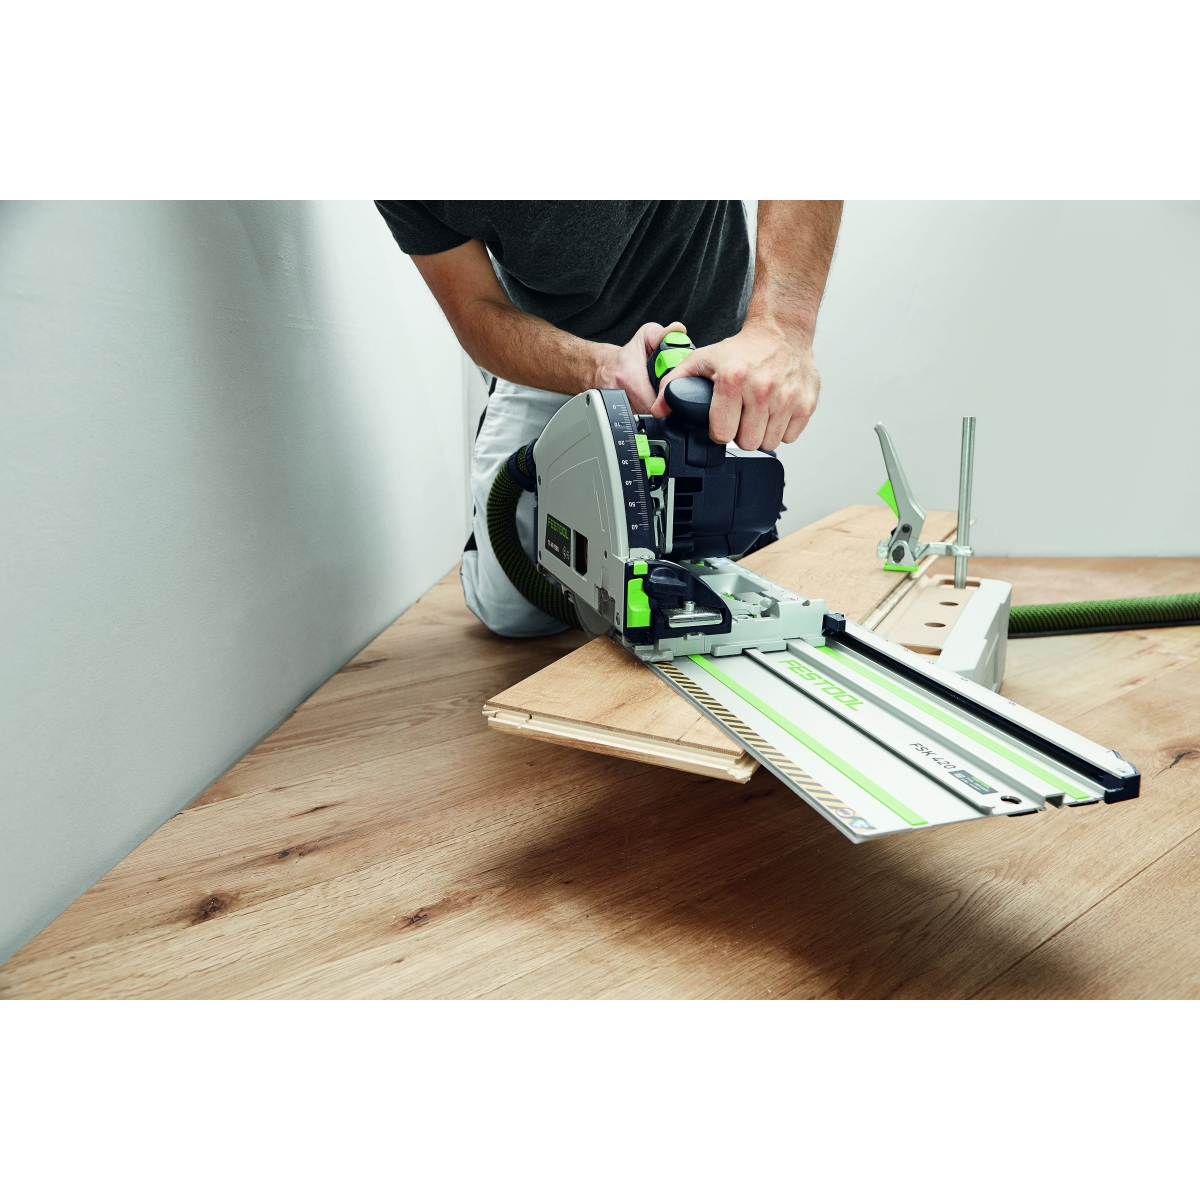 Festool TS 60K 168mm Plunge Cut Saw in Systainer with 1400mm Rail